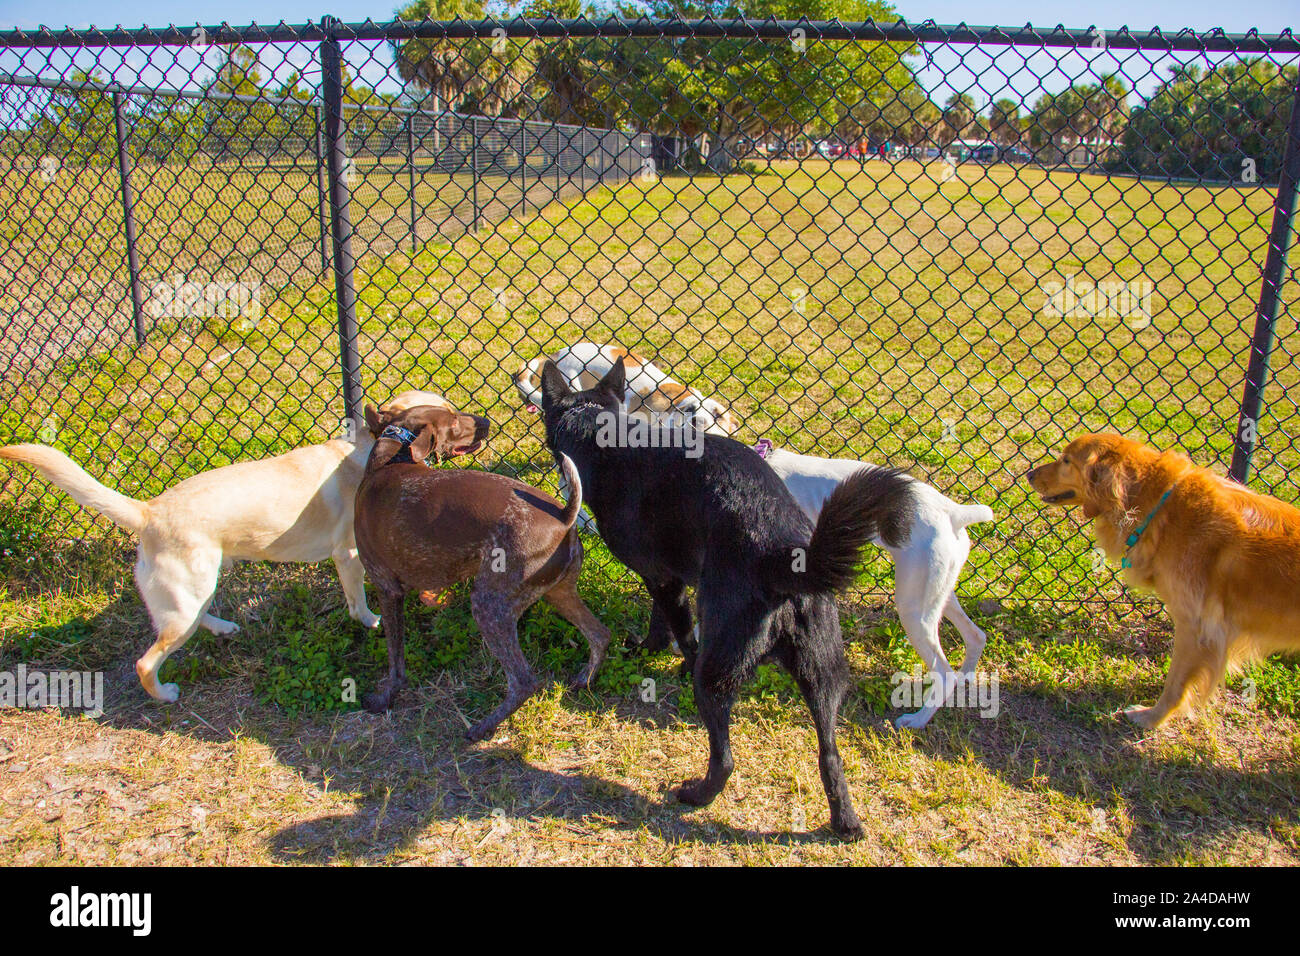 Group of dogs on either side of a fence in a public park, United States Stock Photo